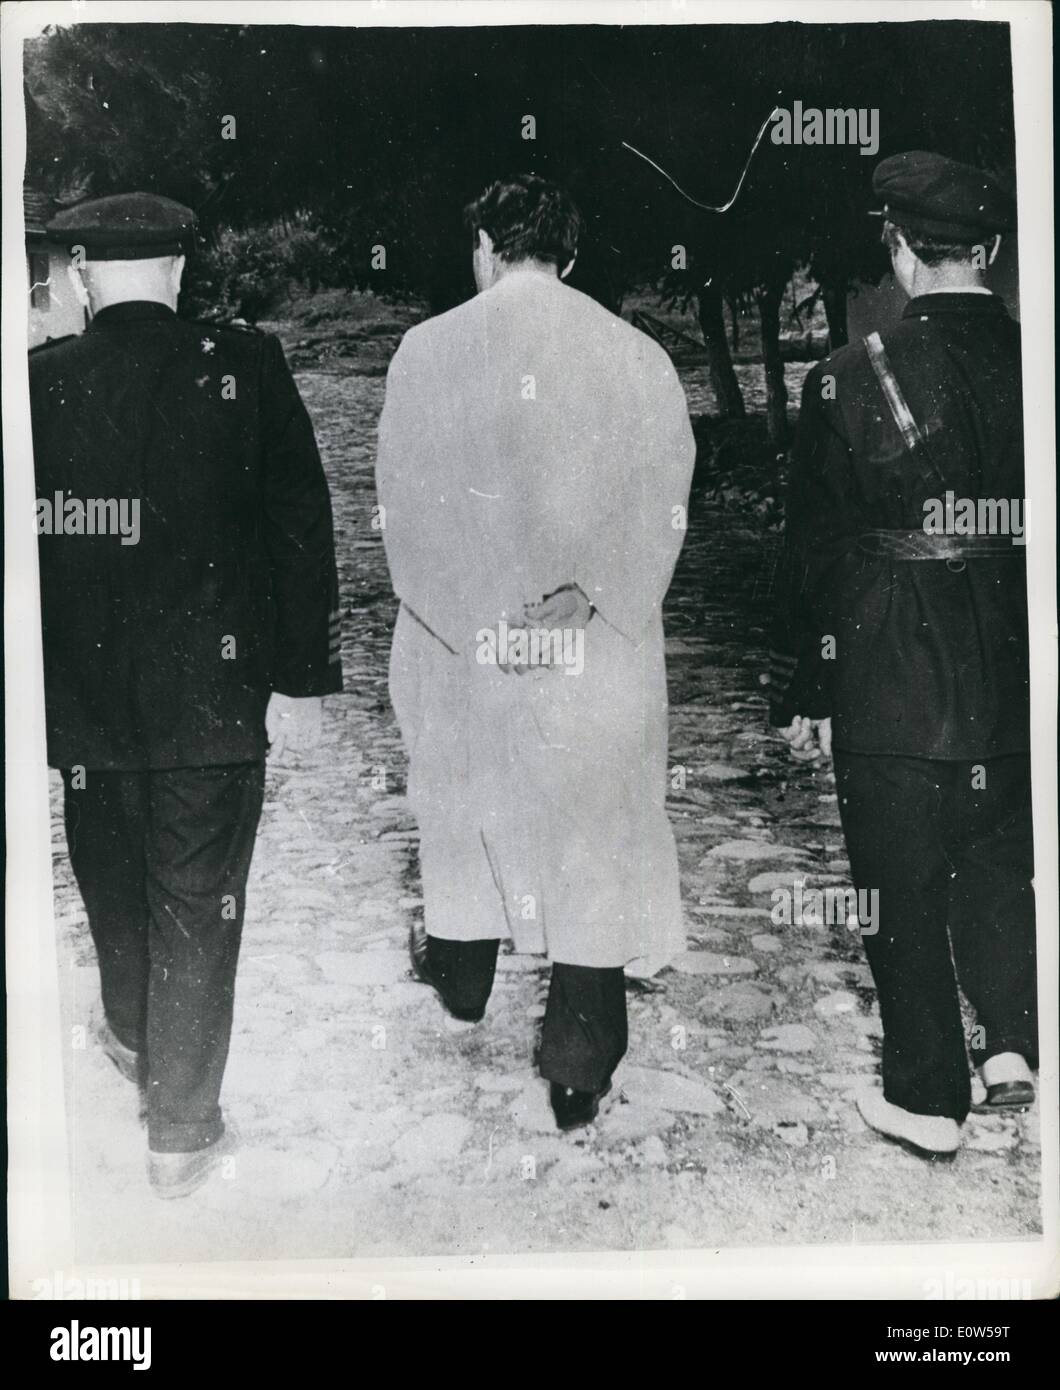 Sep. 09, 1961 - Adnan menderes hanged at Istanbul on Sunday: Former premier Adnan menderes was hanged by Istanbul on Sunday after he was convicted by the new government of various crimes. Photo shows Menderes walking to the scaffold. elh Stock Photo